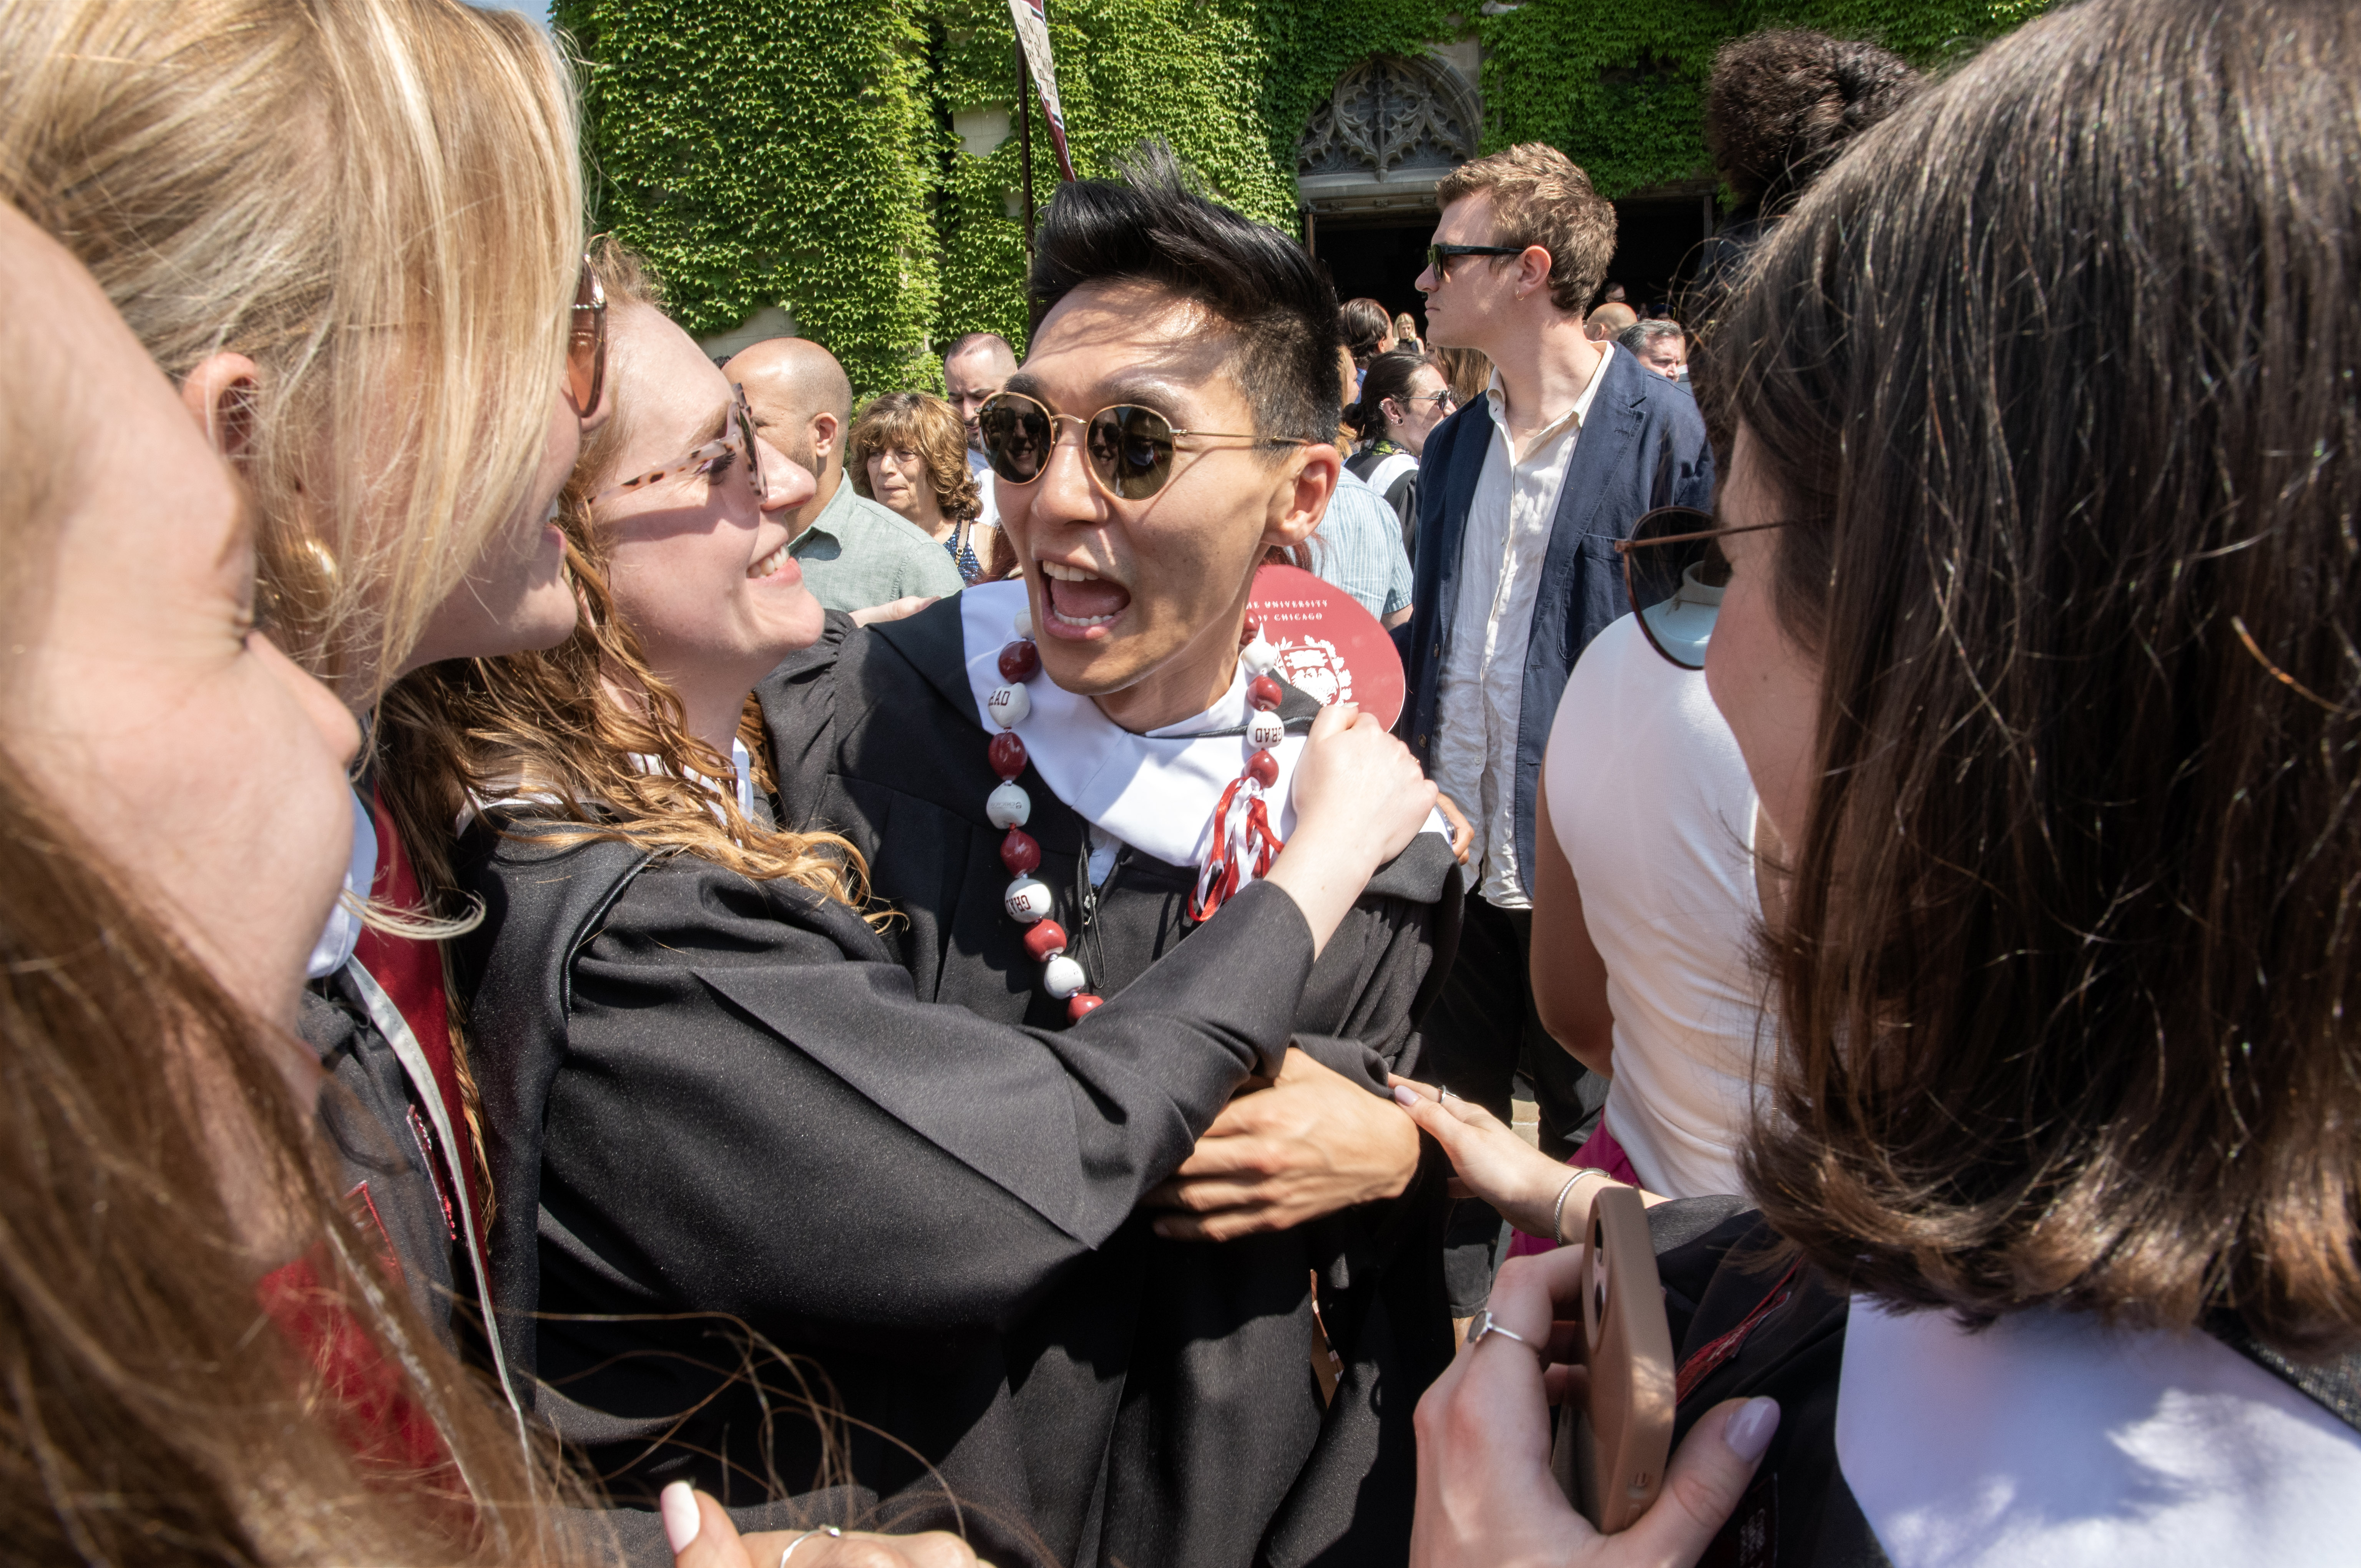 image of an excited male hugging a woman in graduation robes